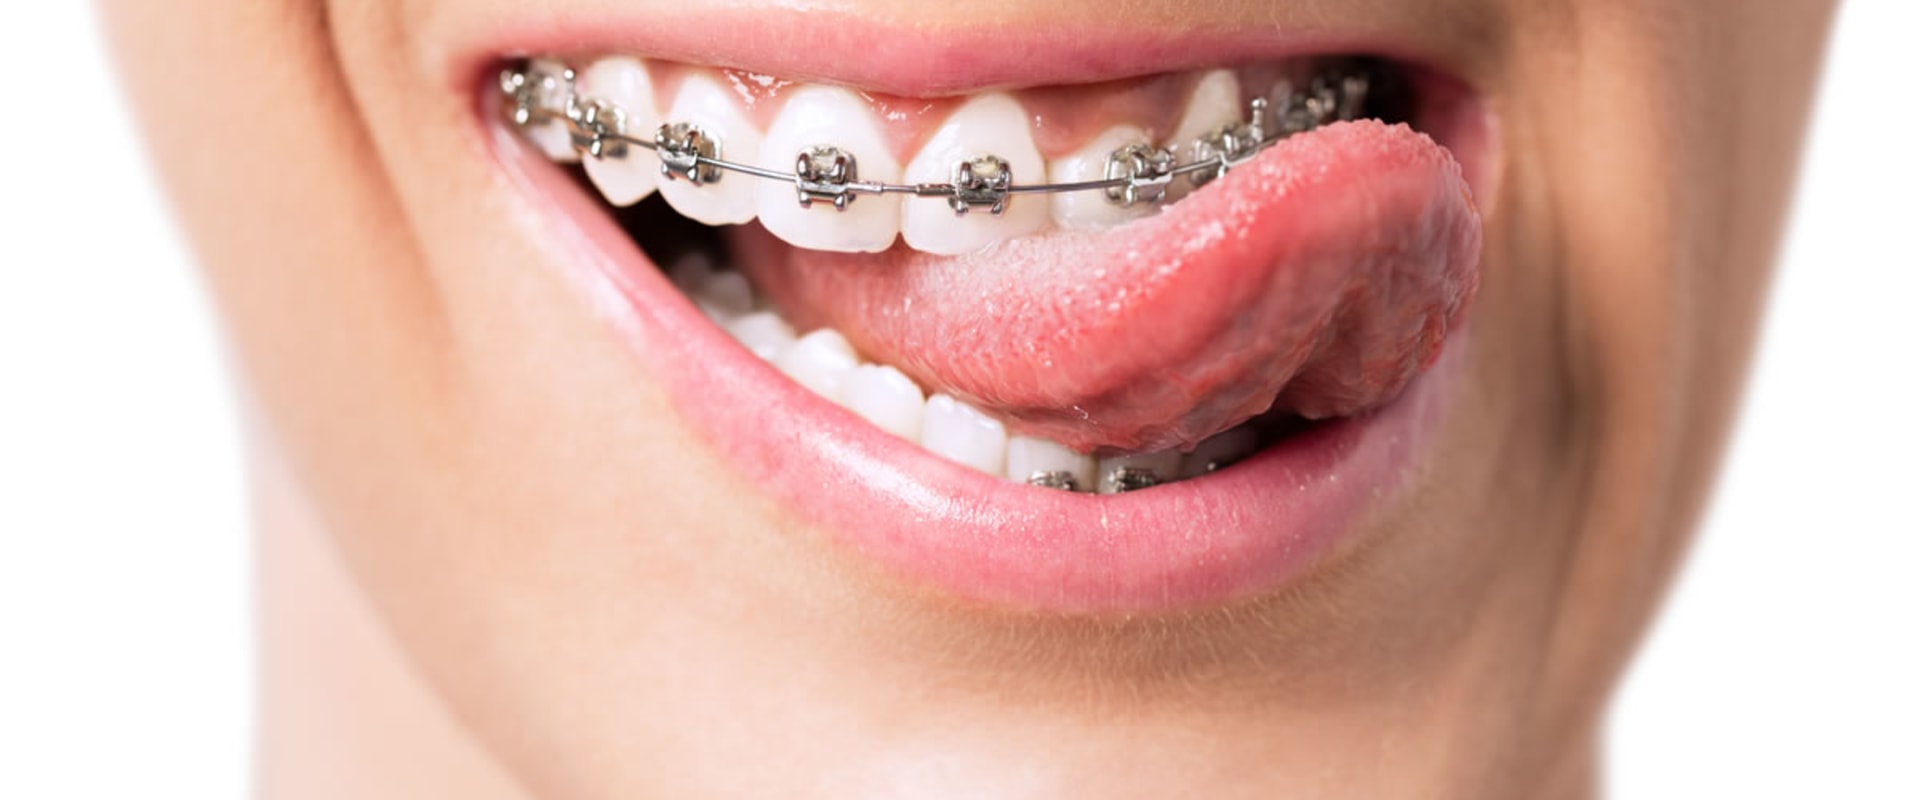 What is an Orthodontist and What Do They Do? - A Comprehensive Guide